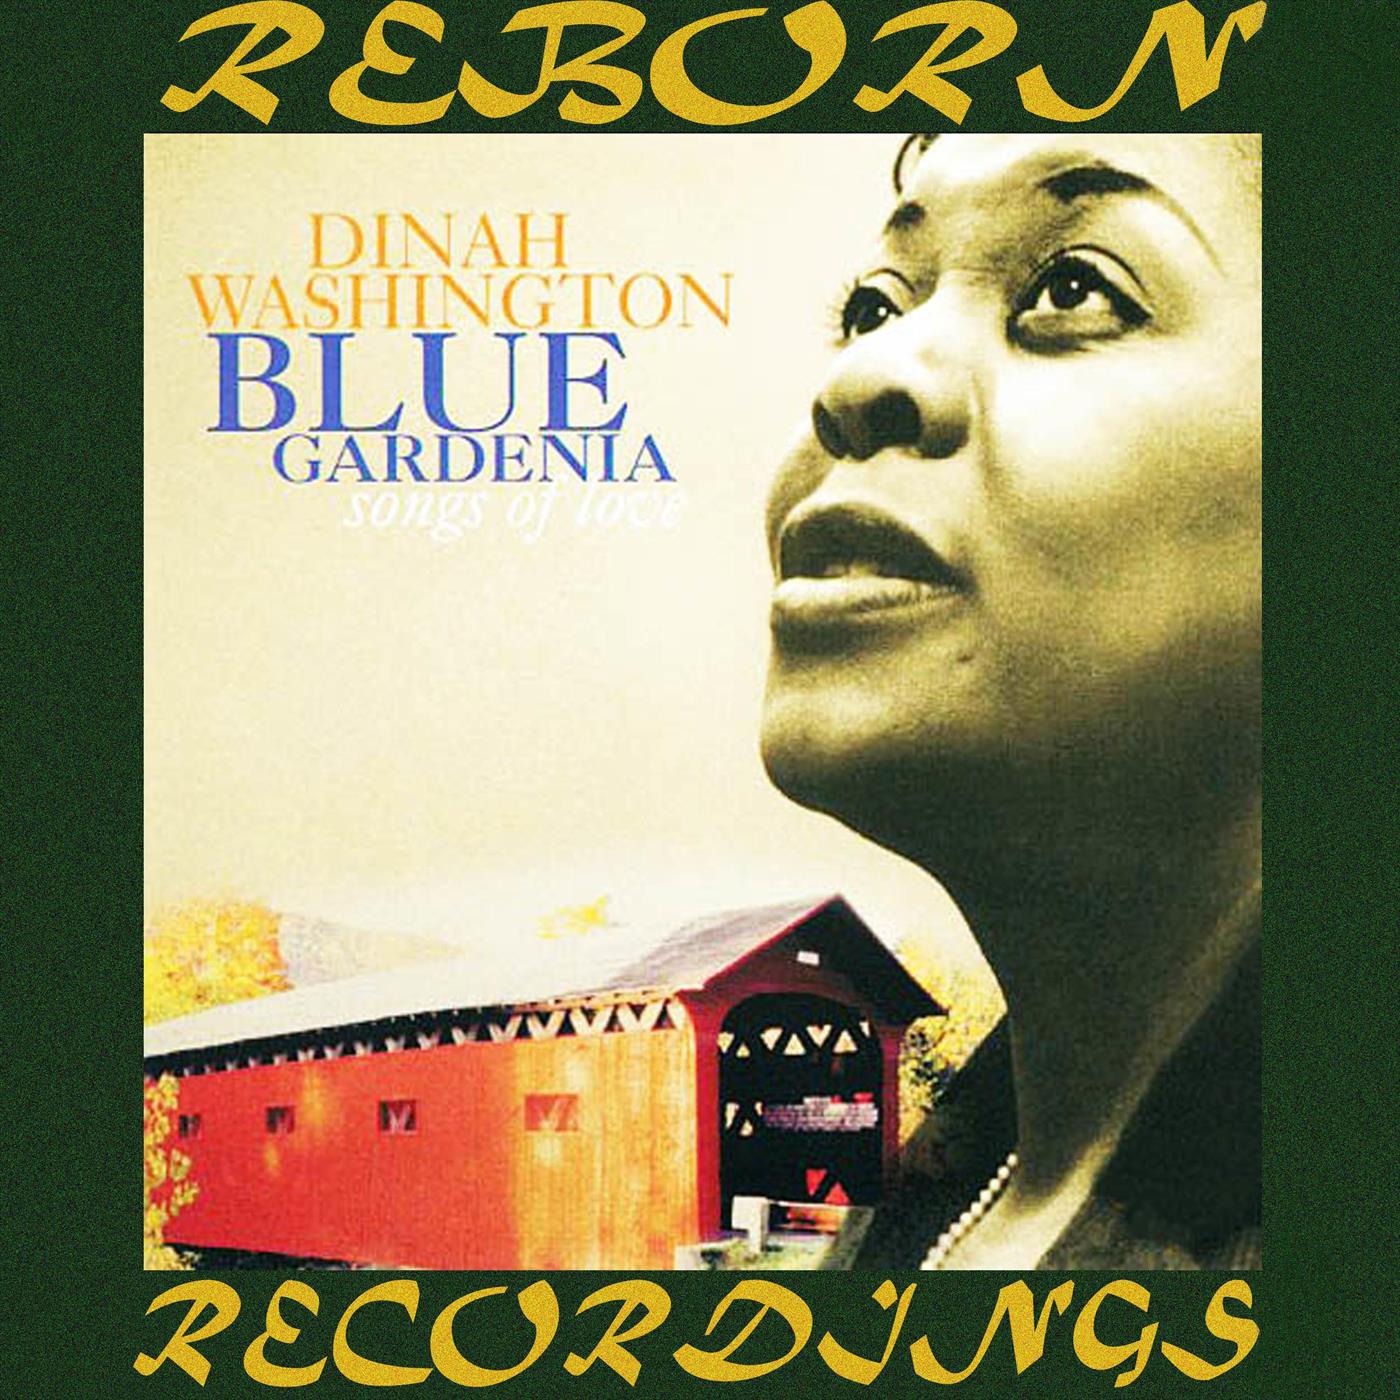 Blue Gardenia Songs of Love (HD Remastered)